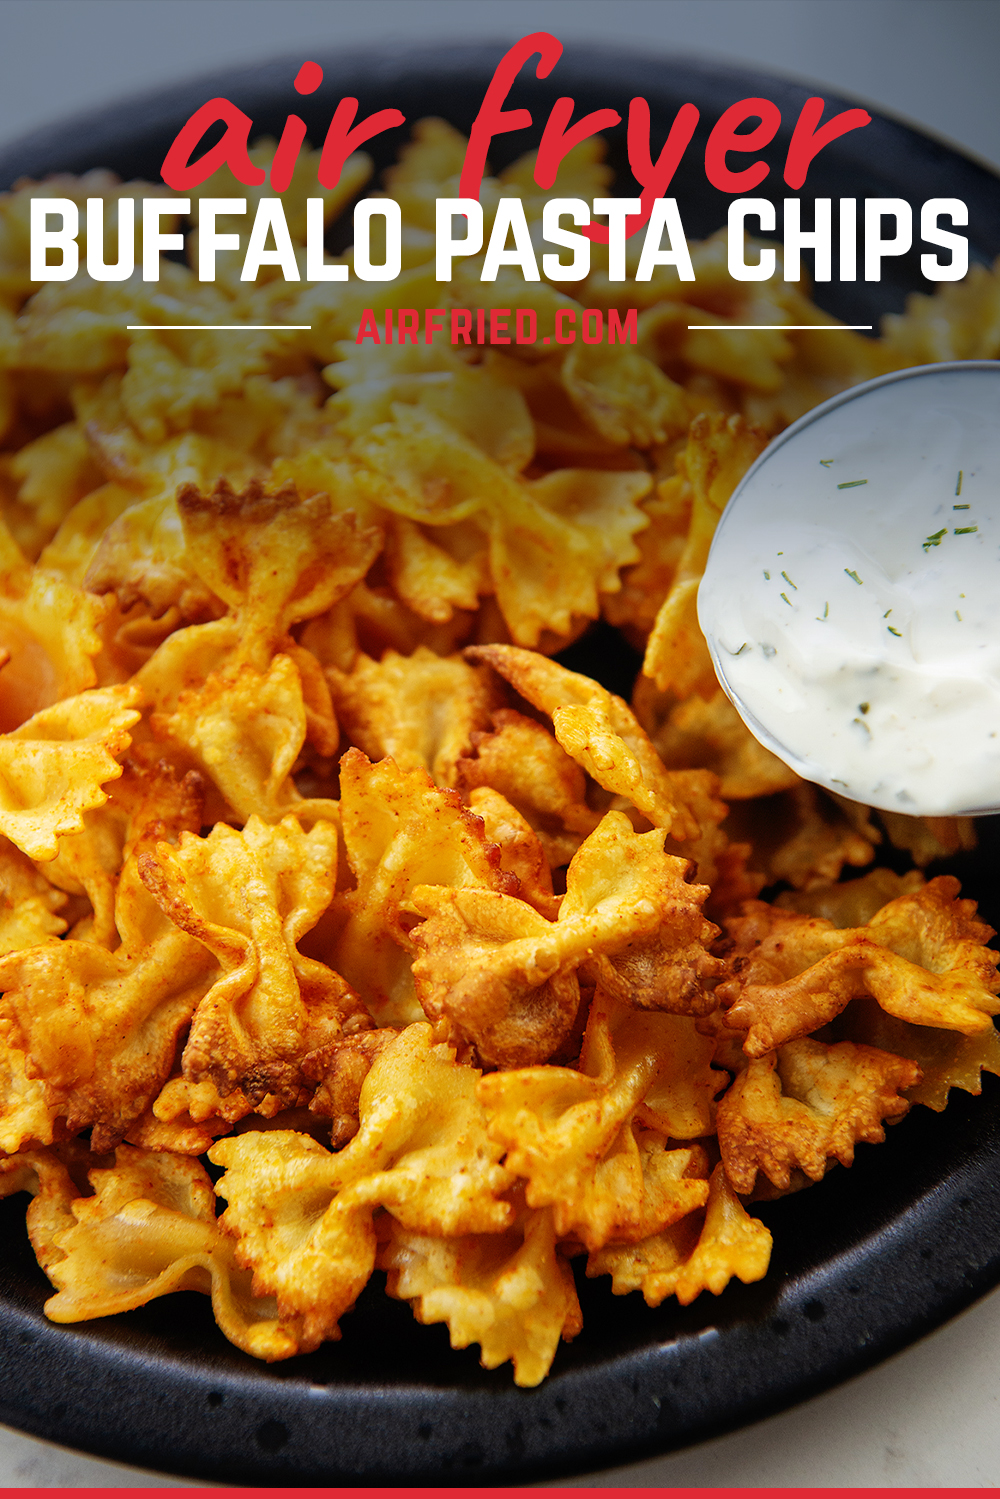 pasta chips on plate with text for Pinterest.